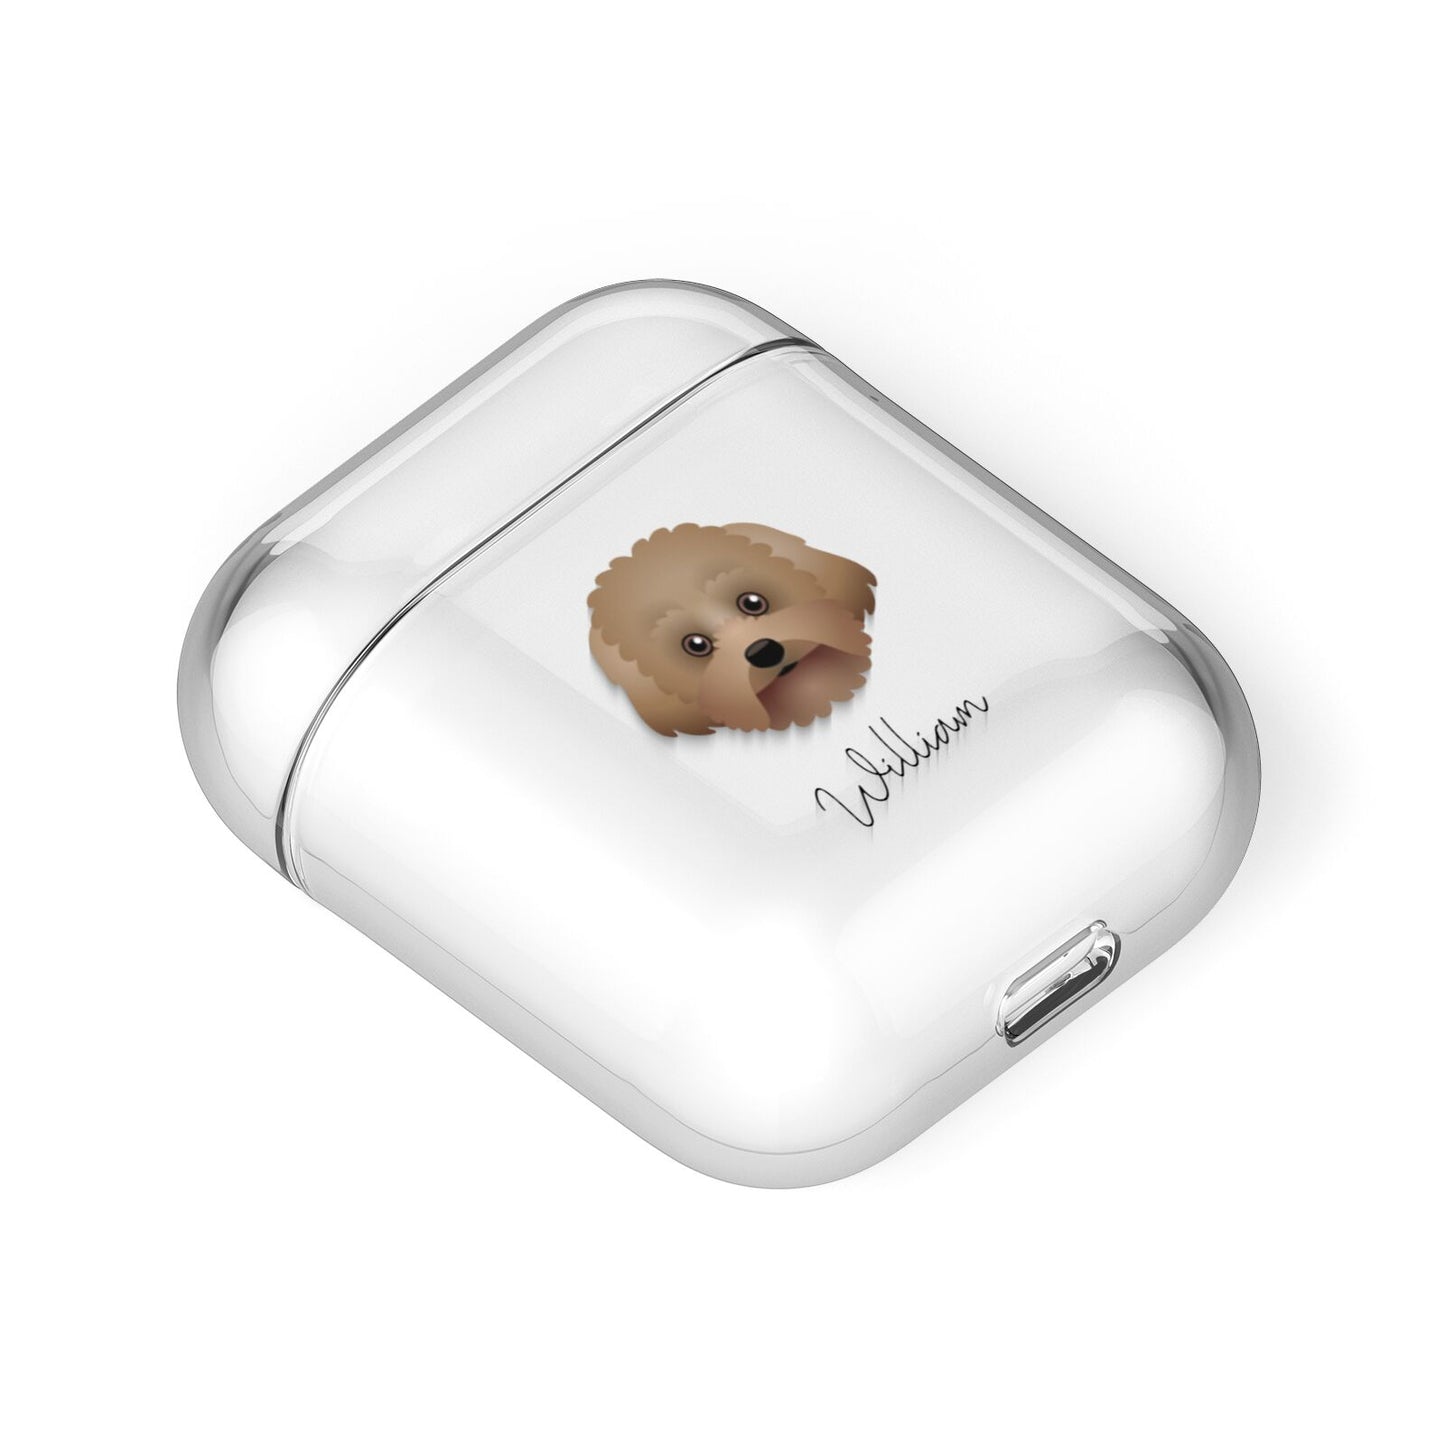 Malti Poo Personalised AirPods Case Laid Flat